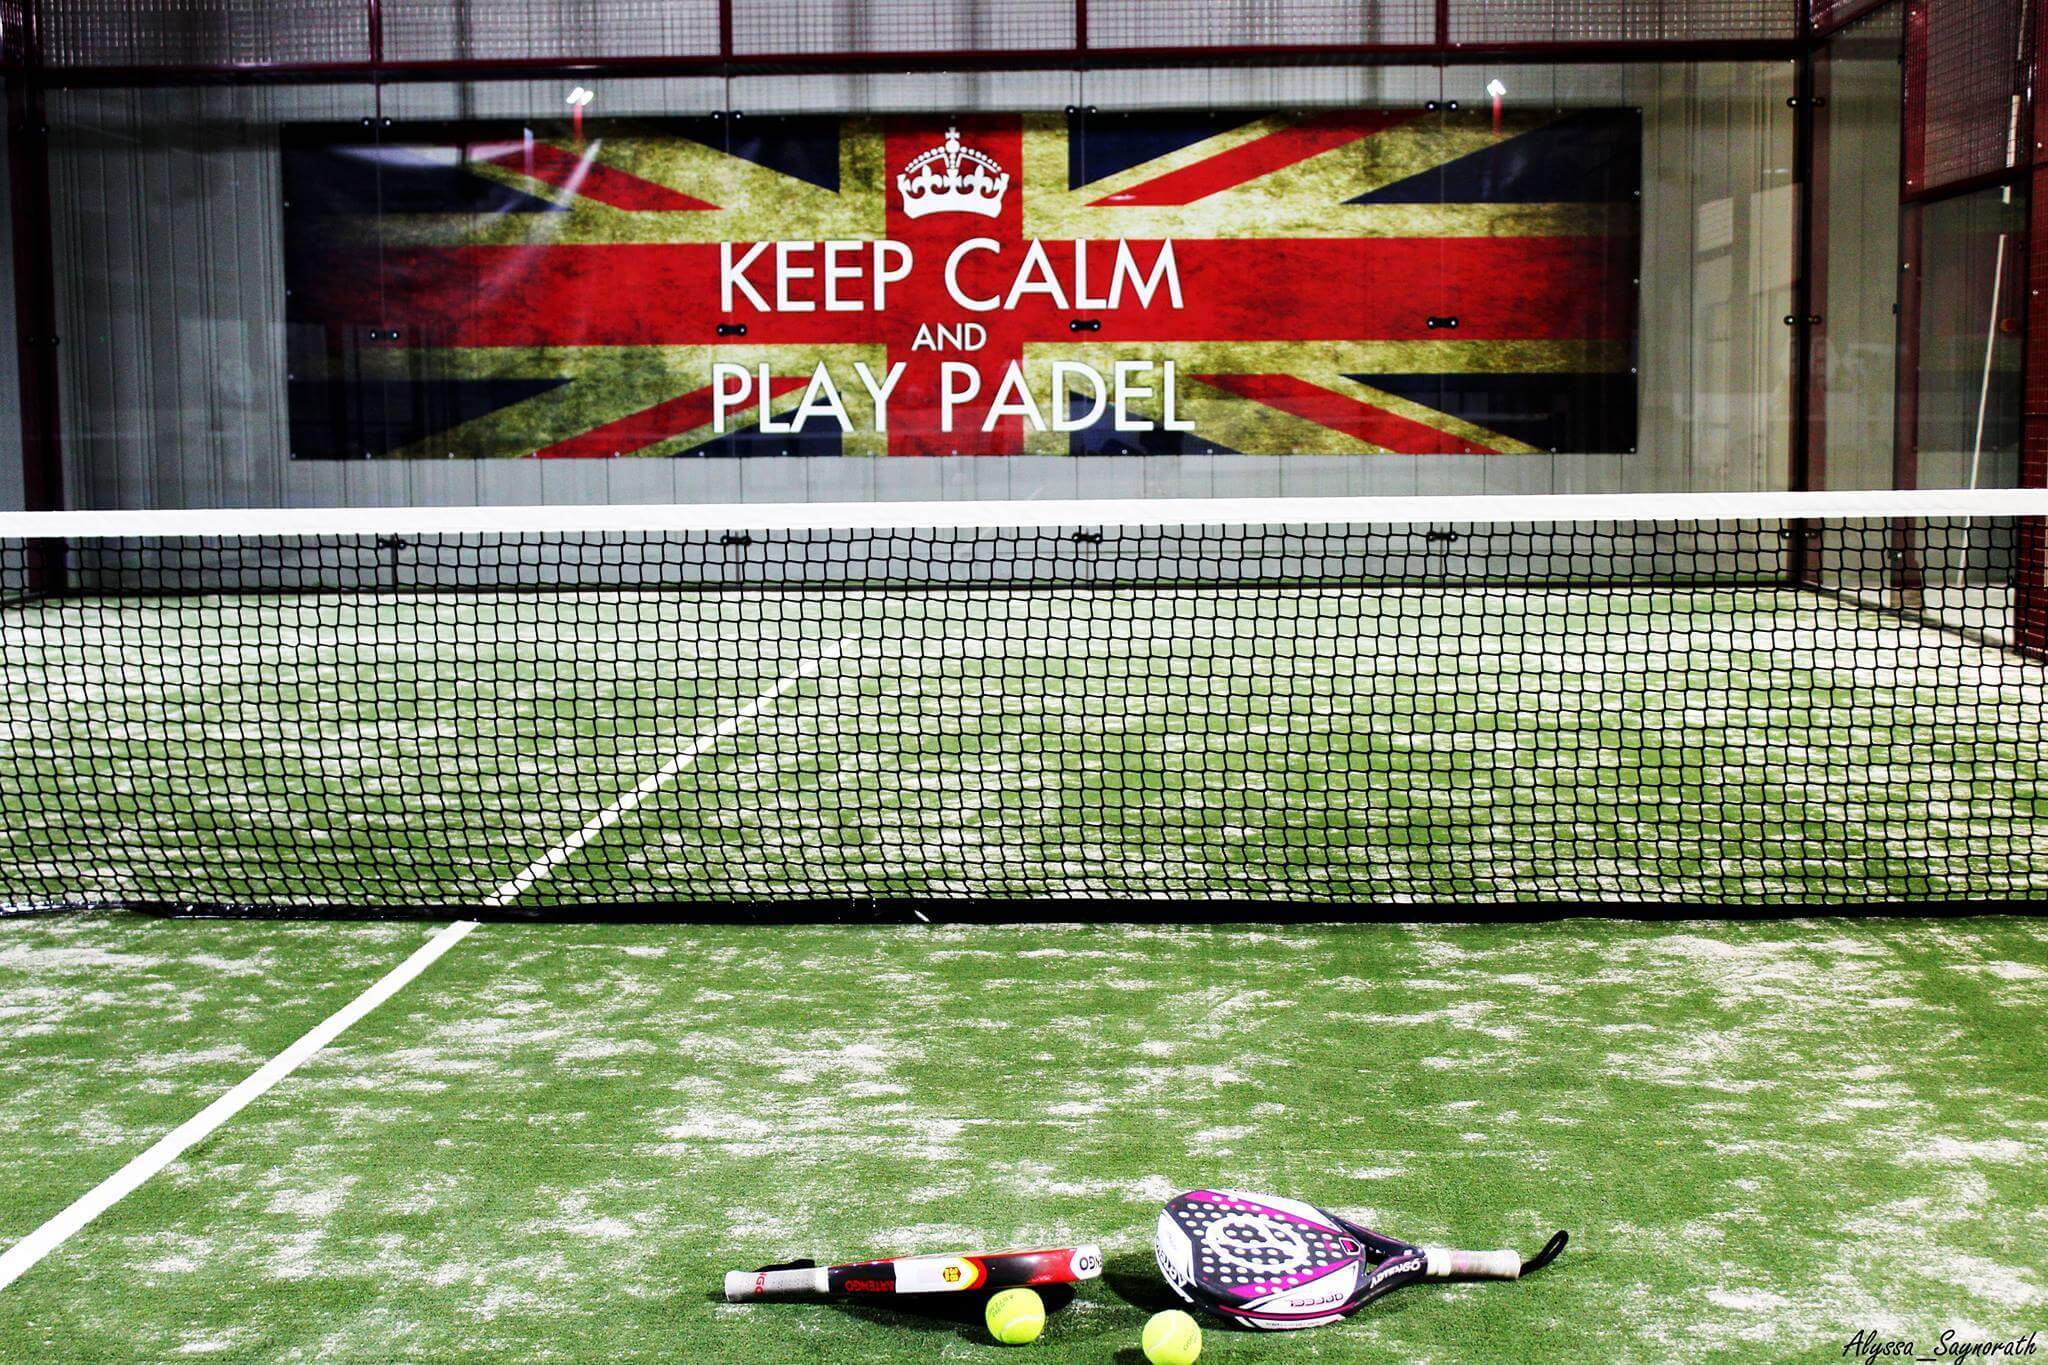 The S'match: The club of padel in Lens